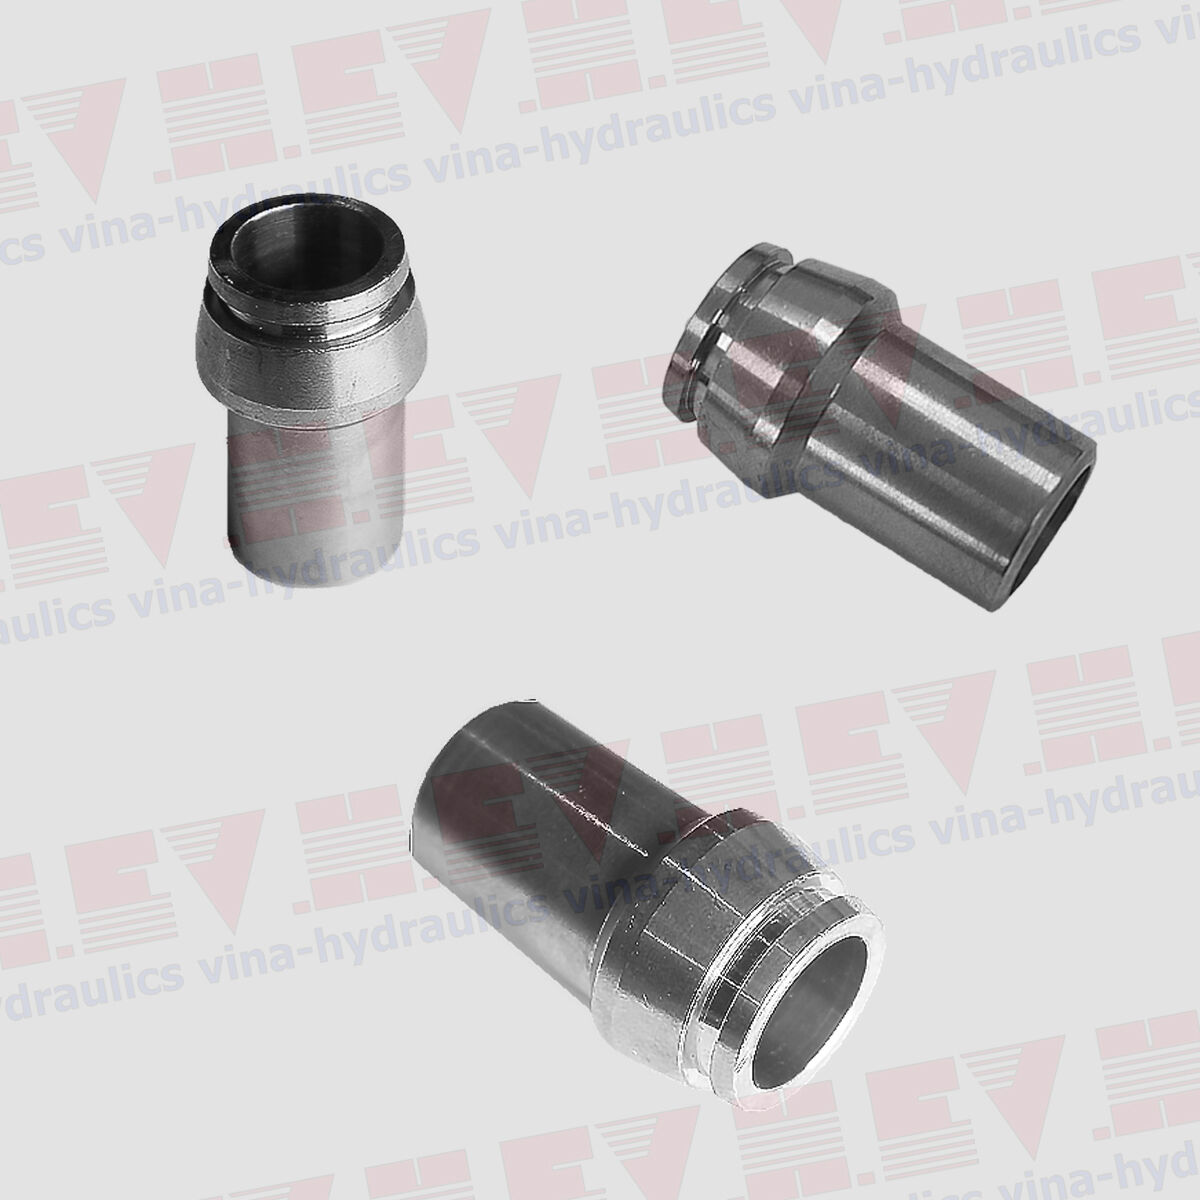 Same-level welding nipple SS316 at cheap prices